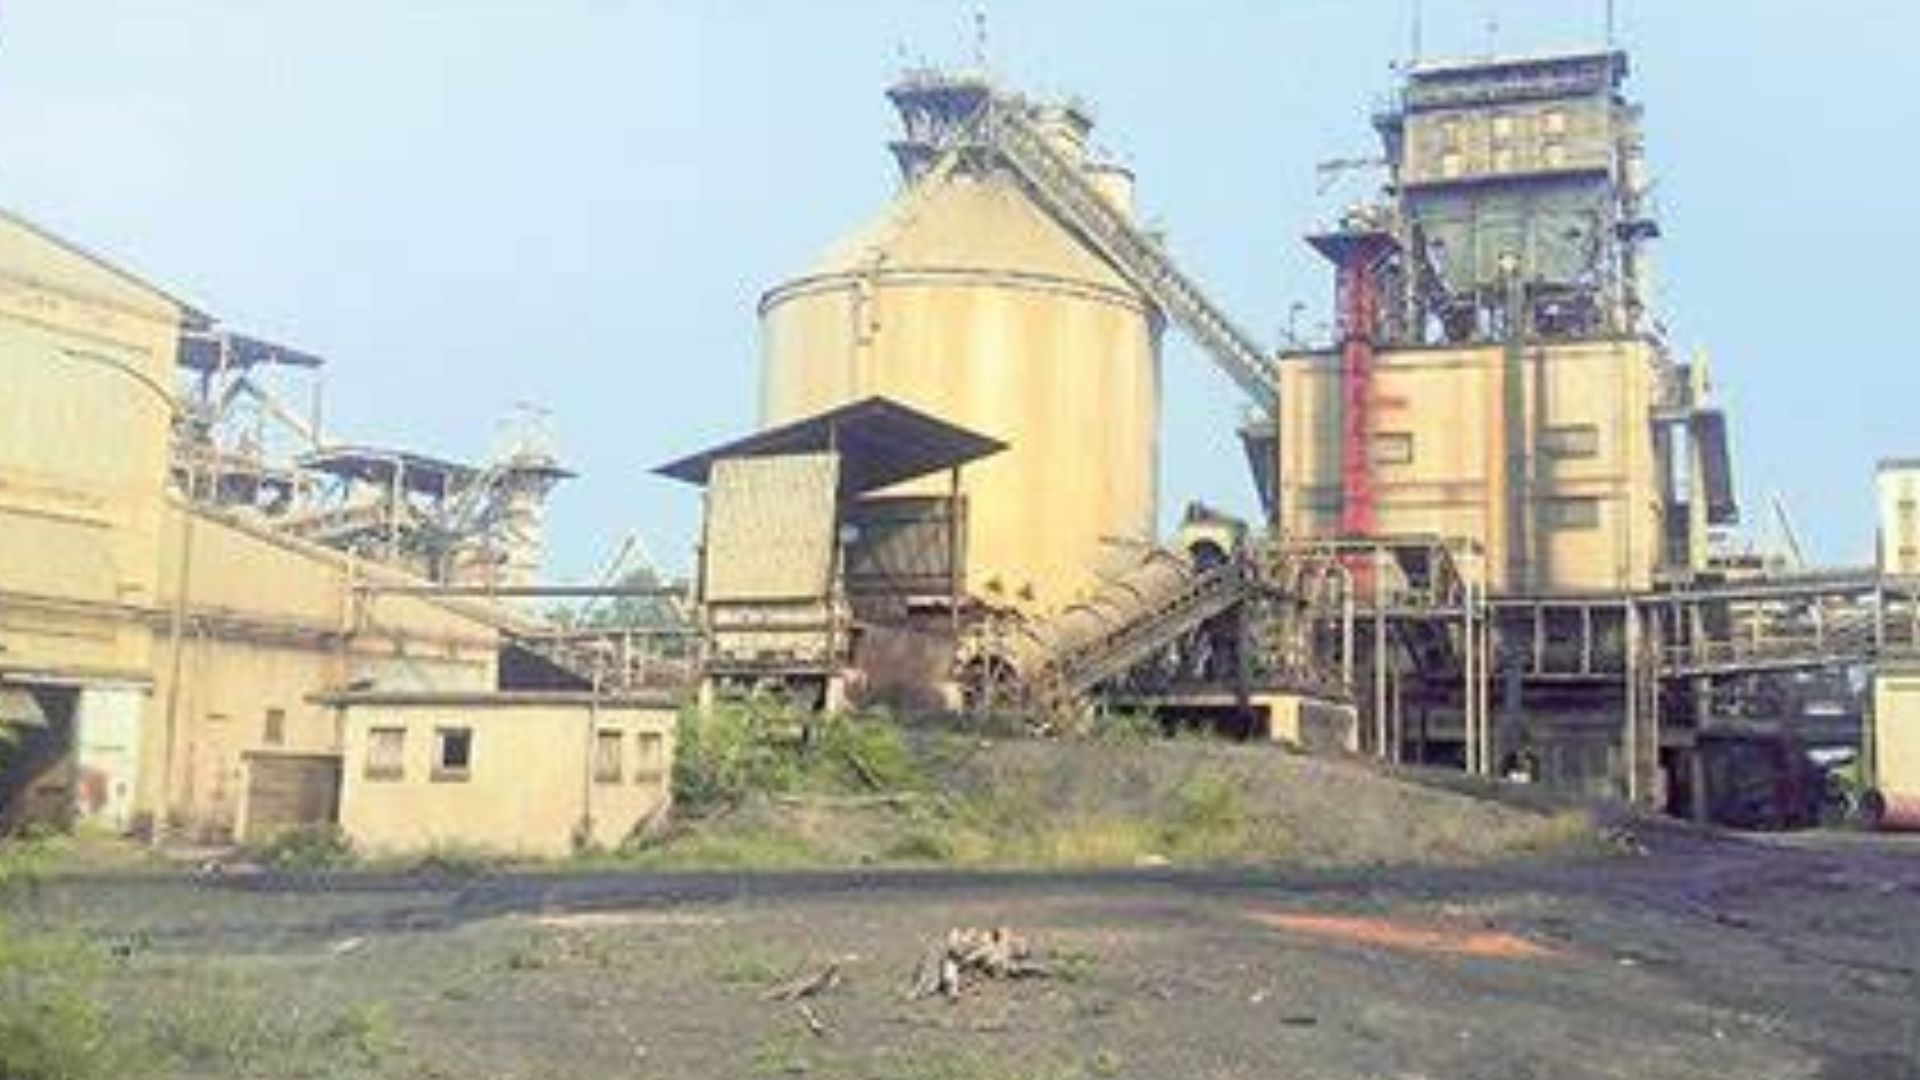 Cement production obstructed